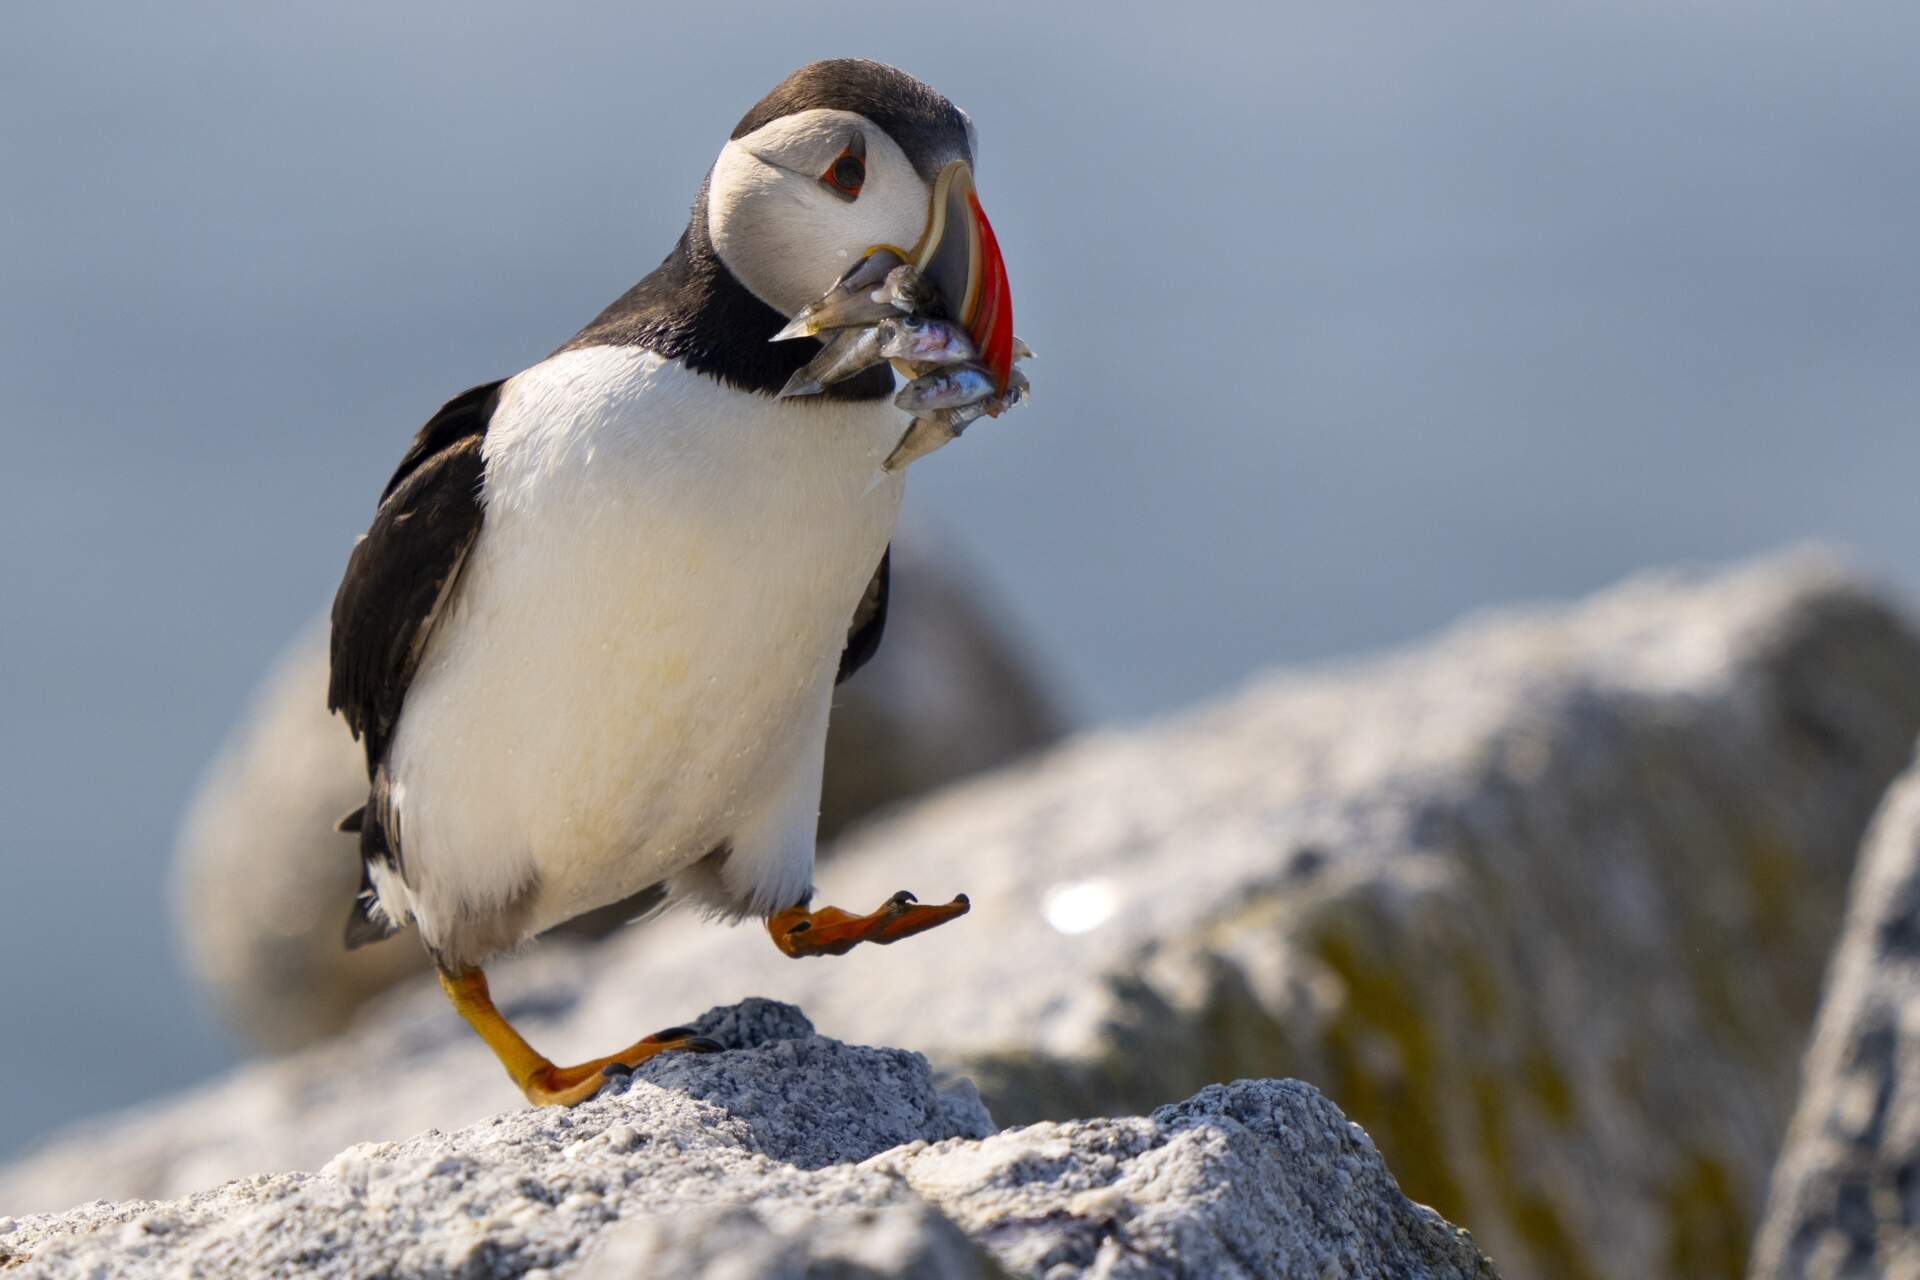 An Atlantic puffin brings a beak full of baitfish to feed its chick in a burrow under rocks on Eastern Egg Rock, a small island off mid-coast Maine. (Robert F. Bukaty/AP)